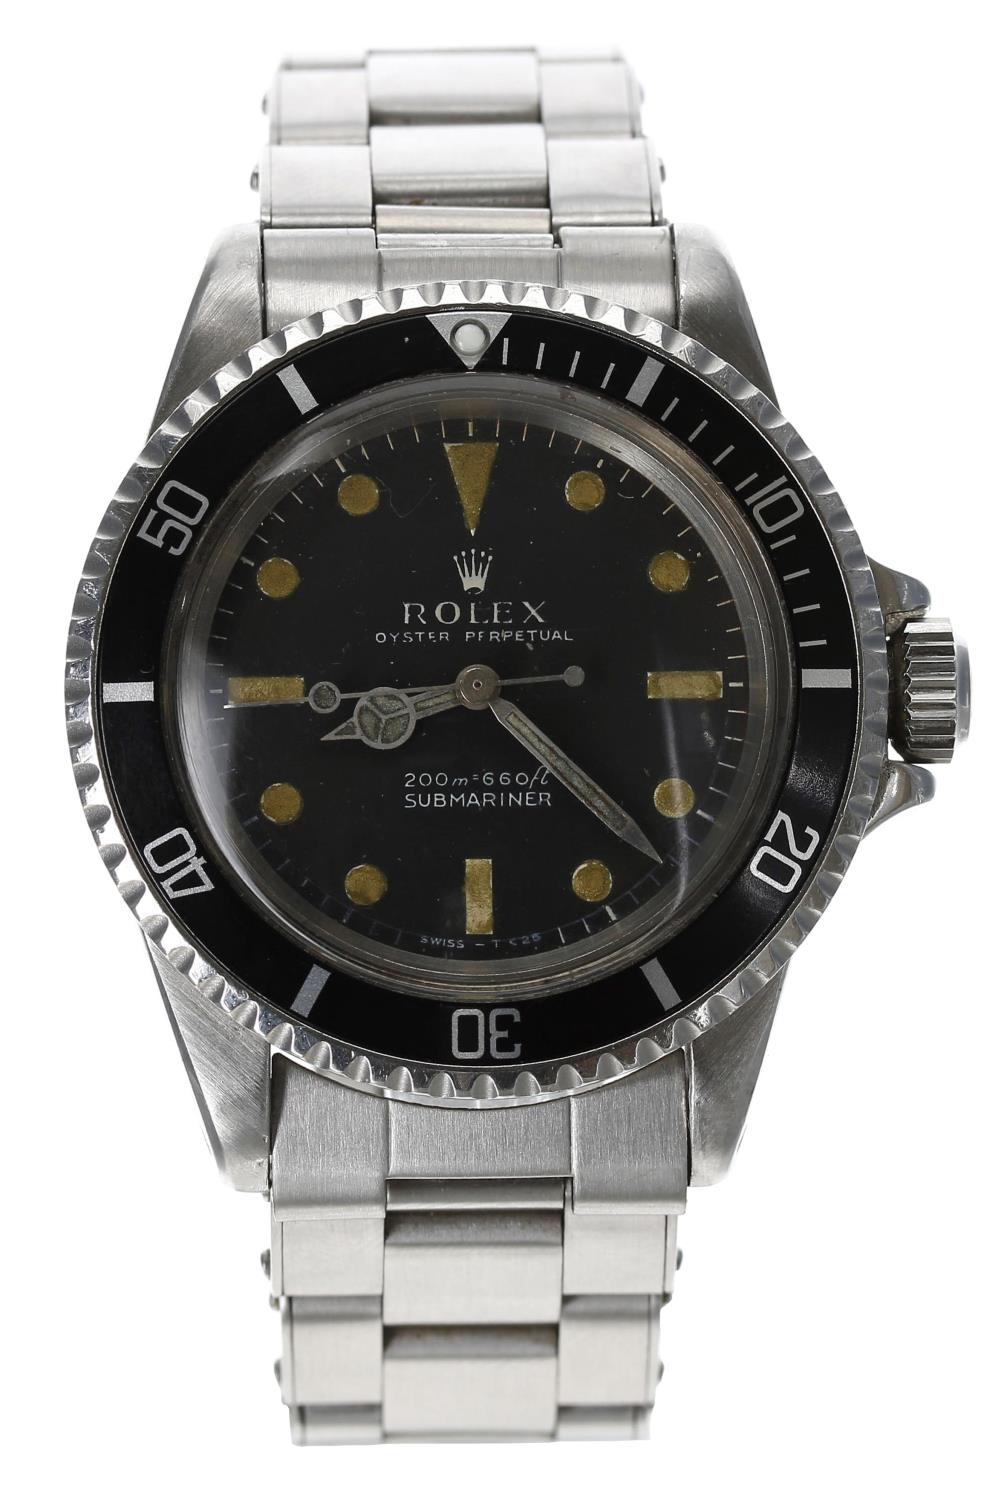 Rolex Oyster Perpetual Submariner 'metres first' stainless steel gentleman's wristwatch, reference